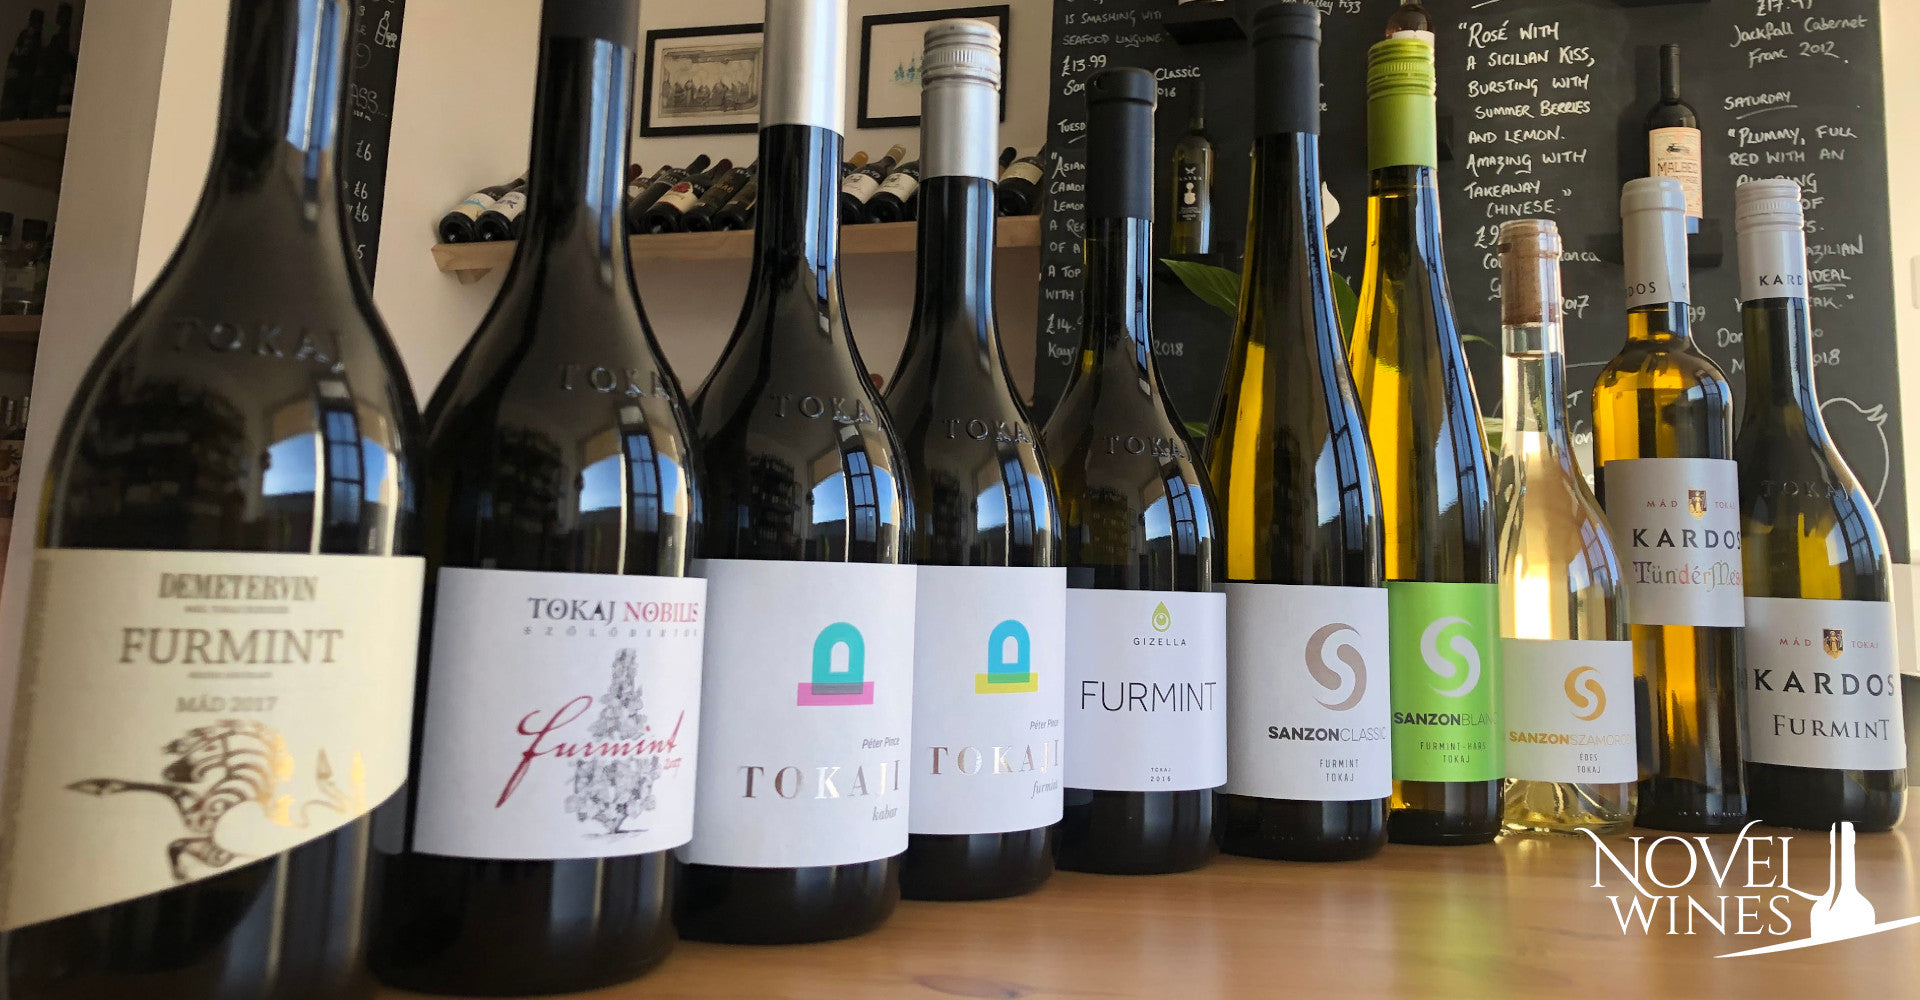 Join us for Furmint February 2.0 in London, 29 January 2020